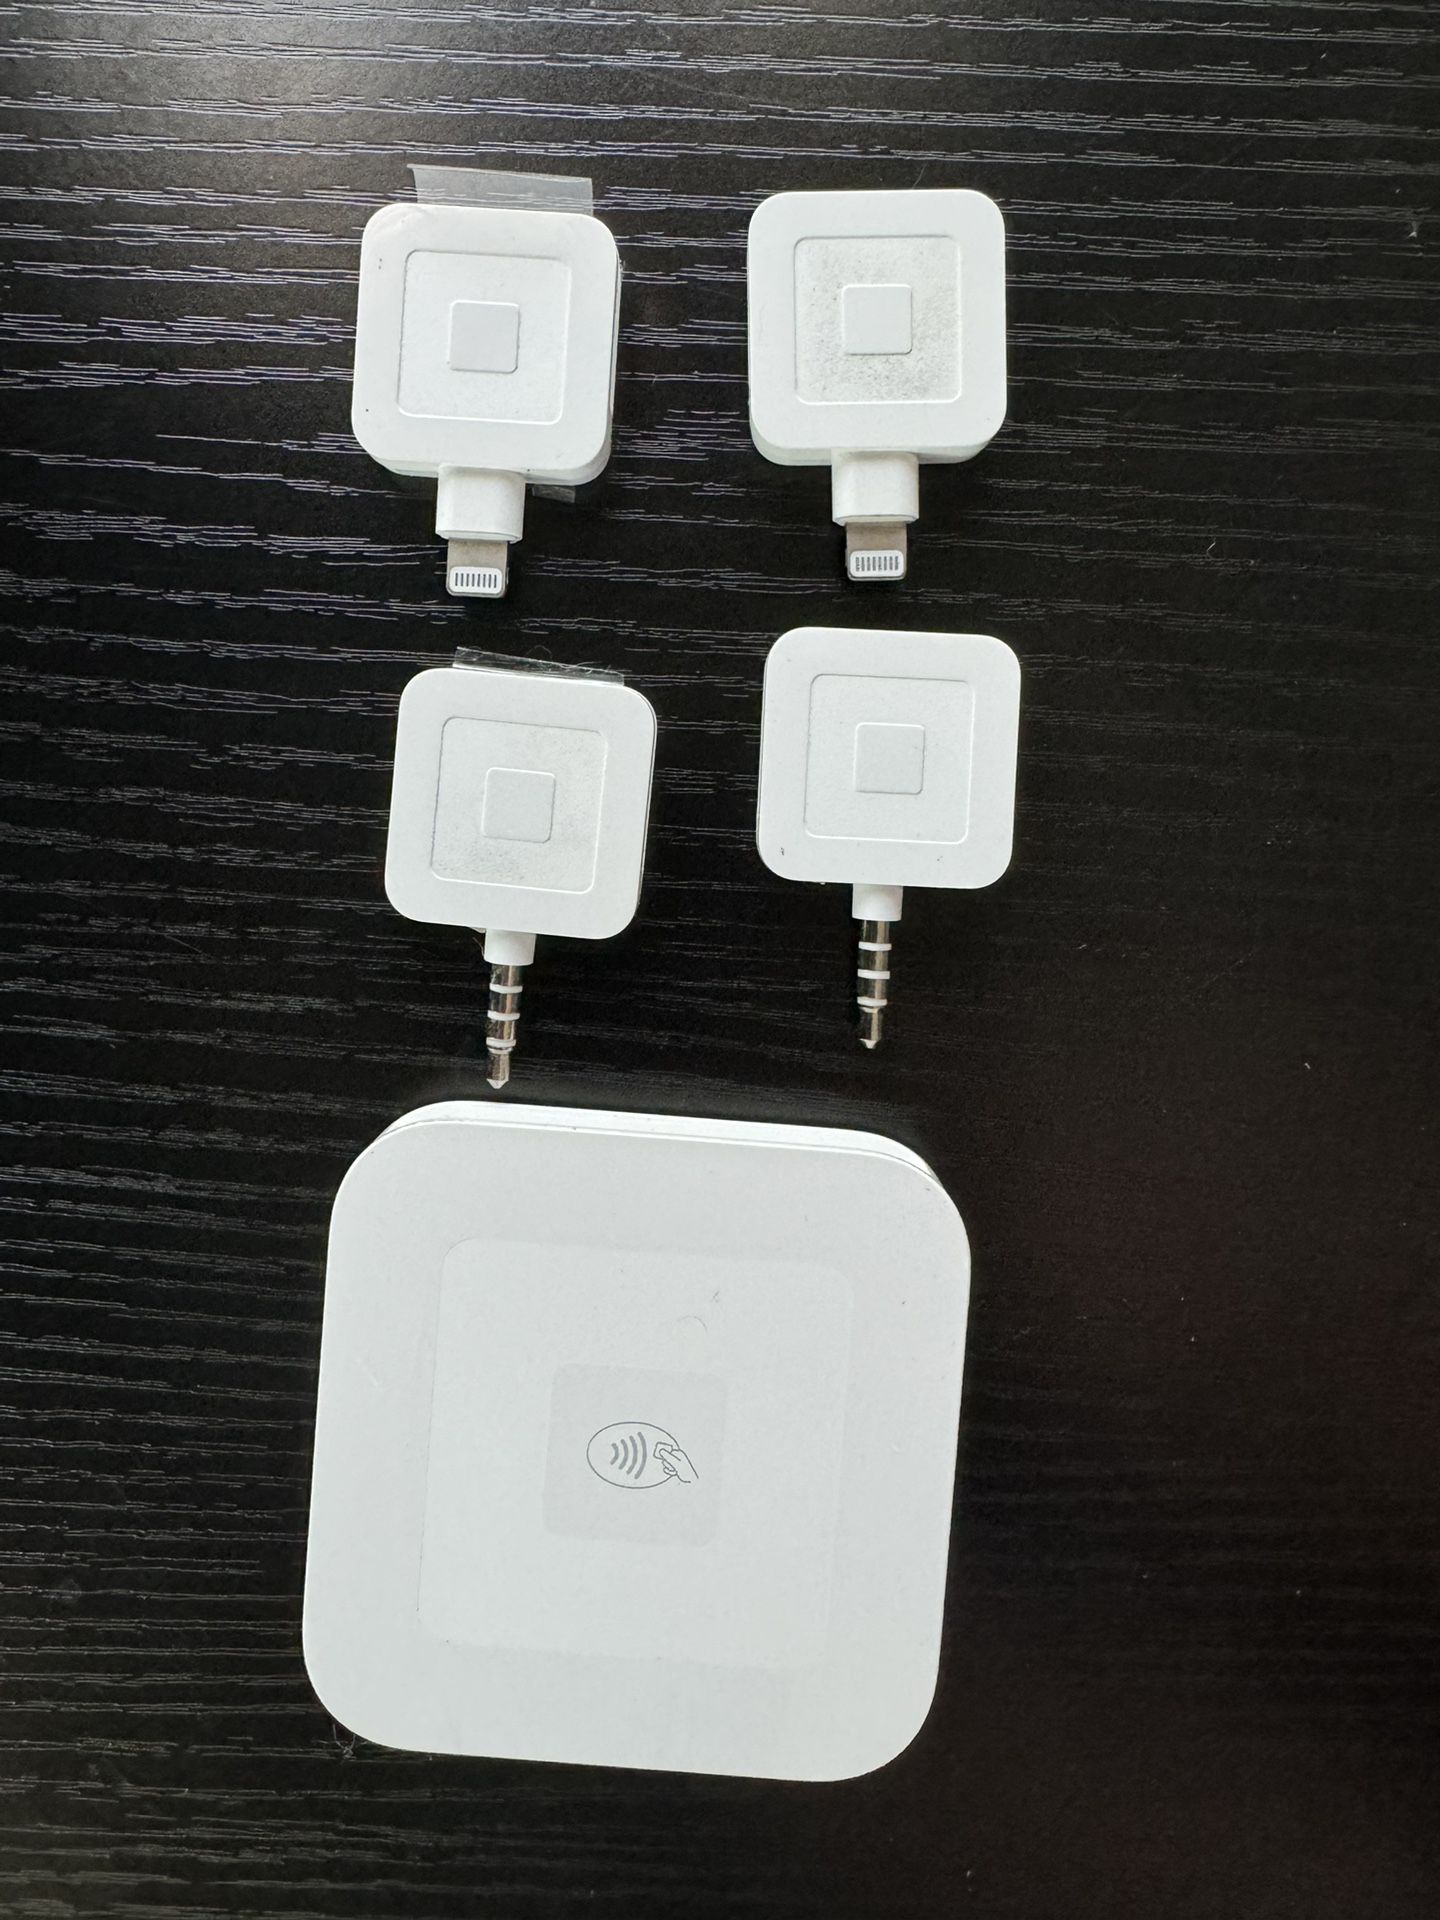 Square Chip Reader And 4 Other Swipe Readers